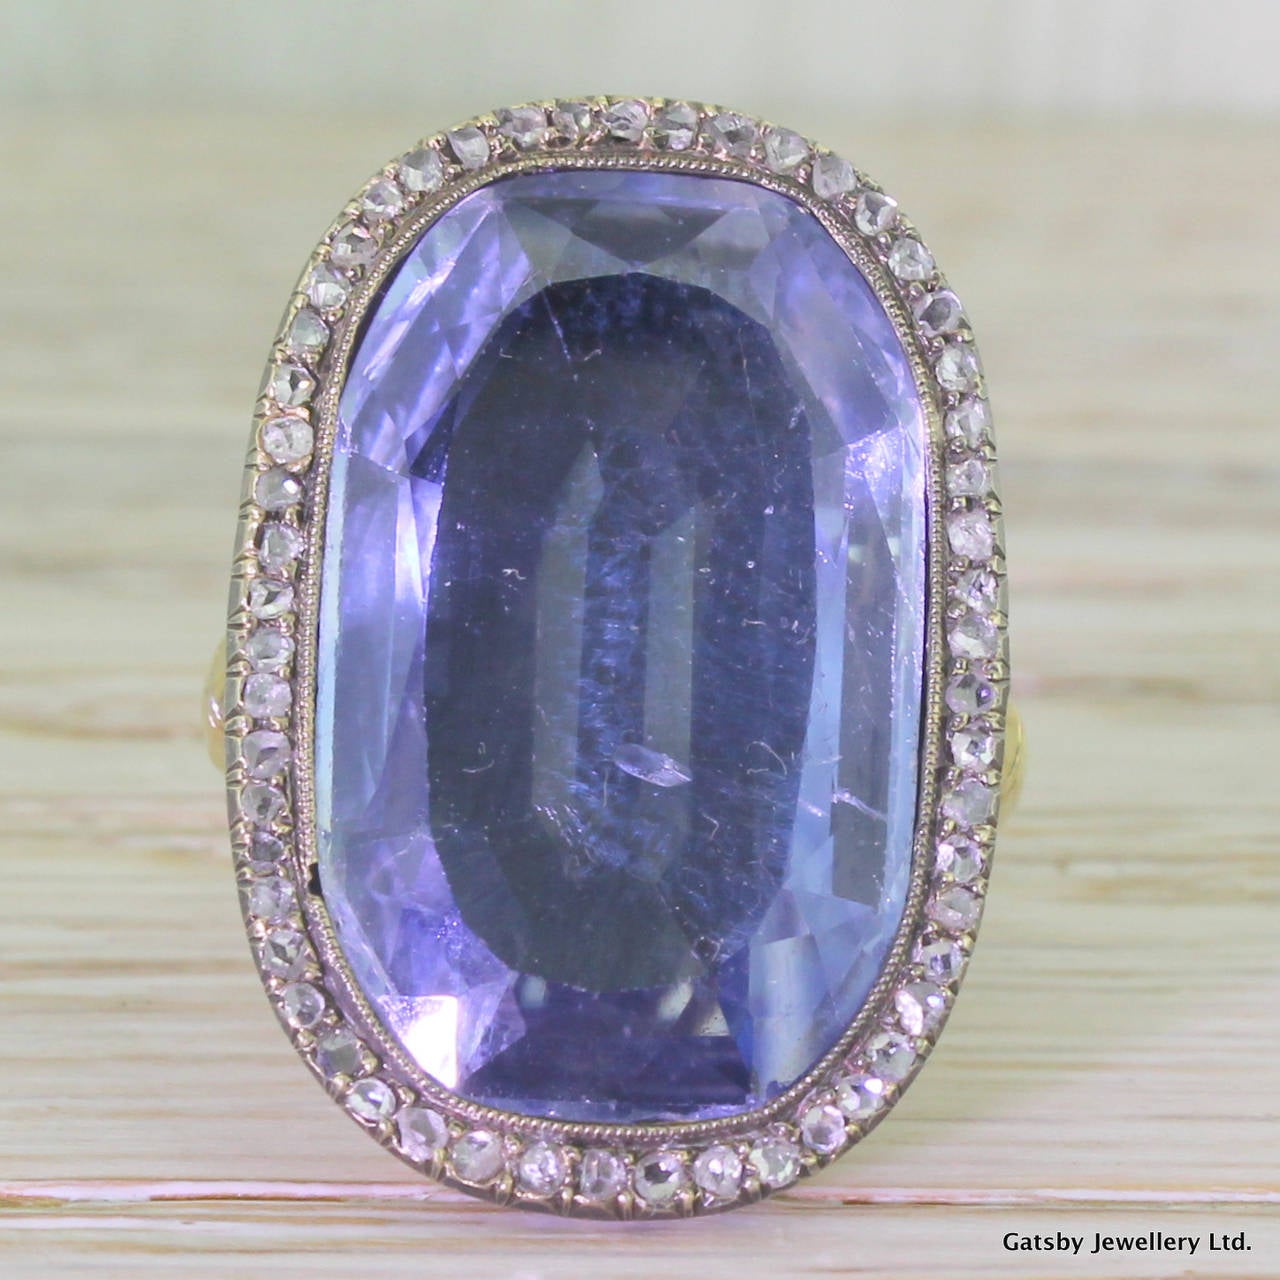 A grand, museum quality ring featuring a veritable boulder of a sapphire. The gorgeous sky blue Ceylon sapphire is natural and unenhanced, weighing in at 25.30 carat. With a halo of 54 rose cut diamonds in the surround, set with milgrain detailing.